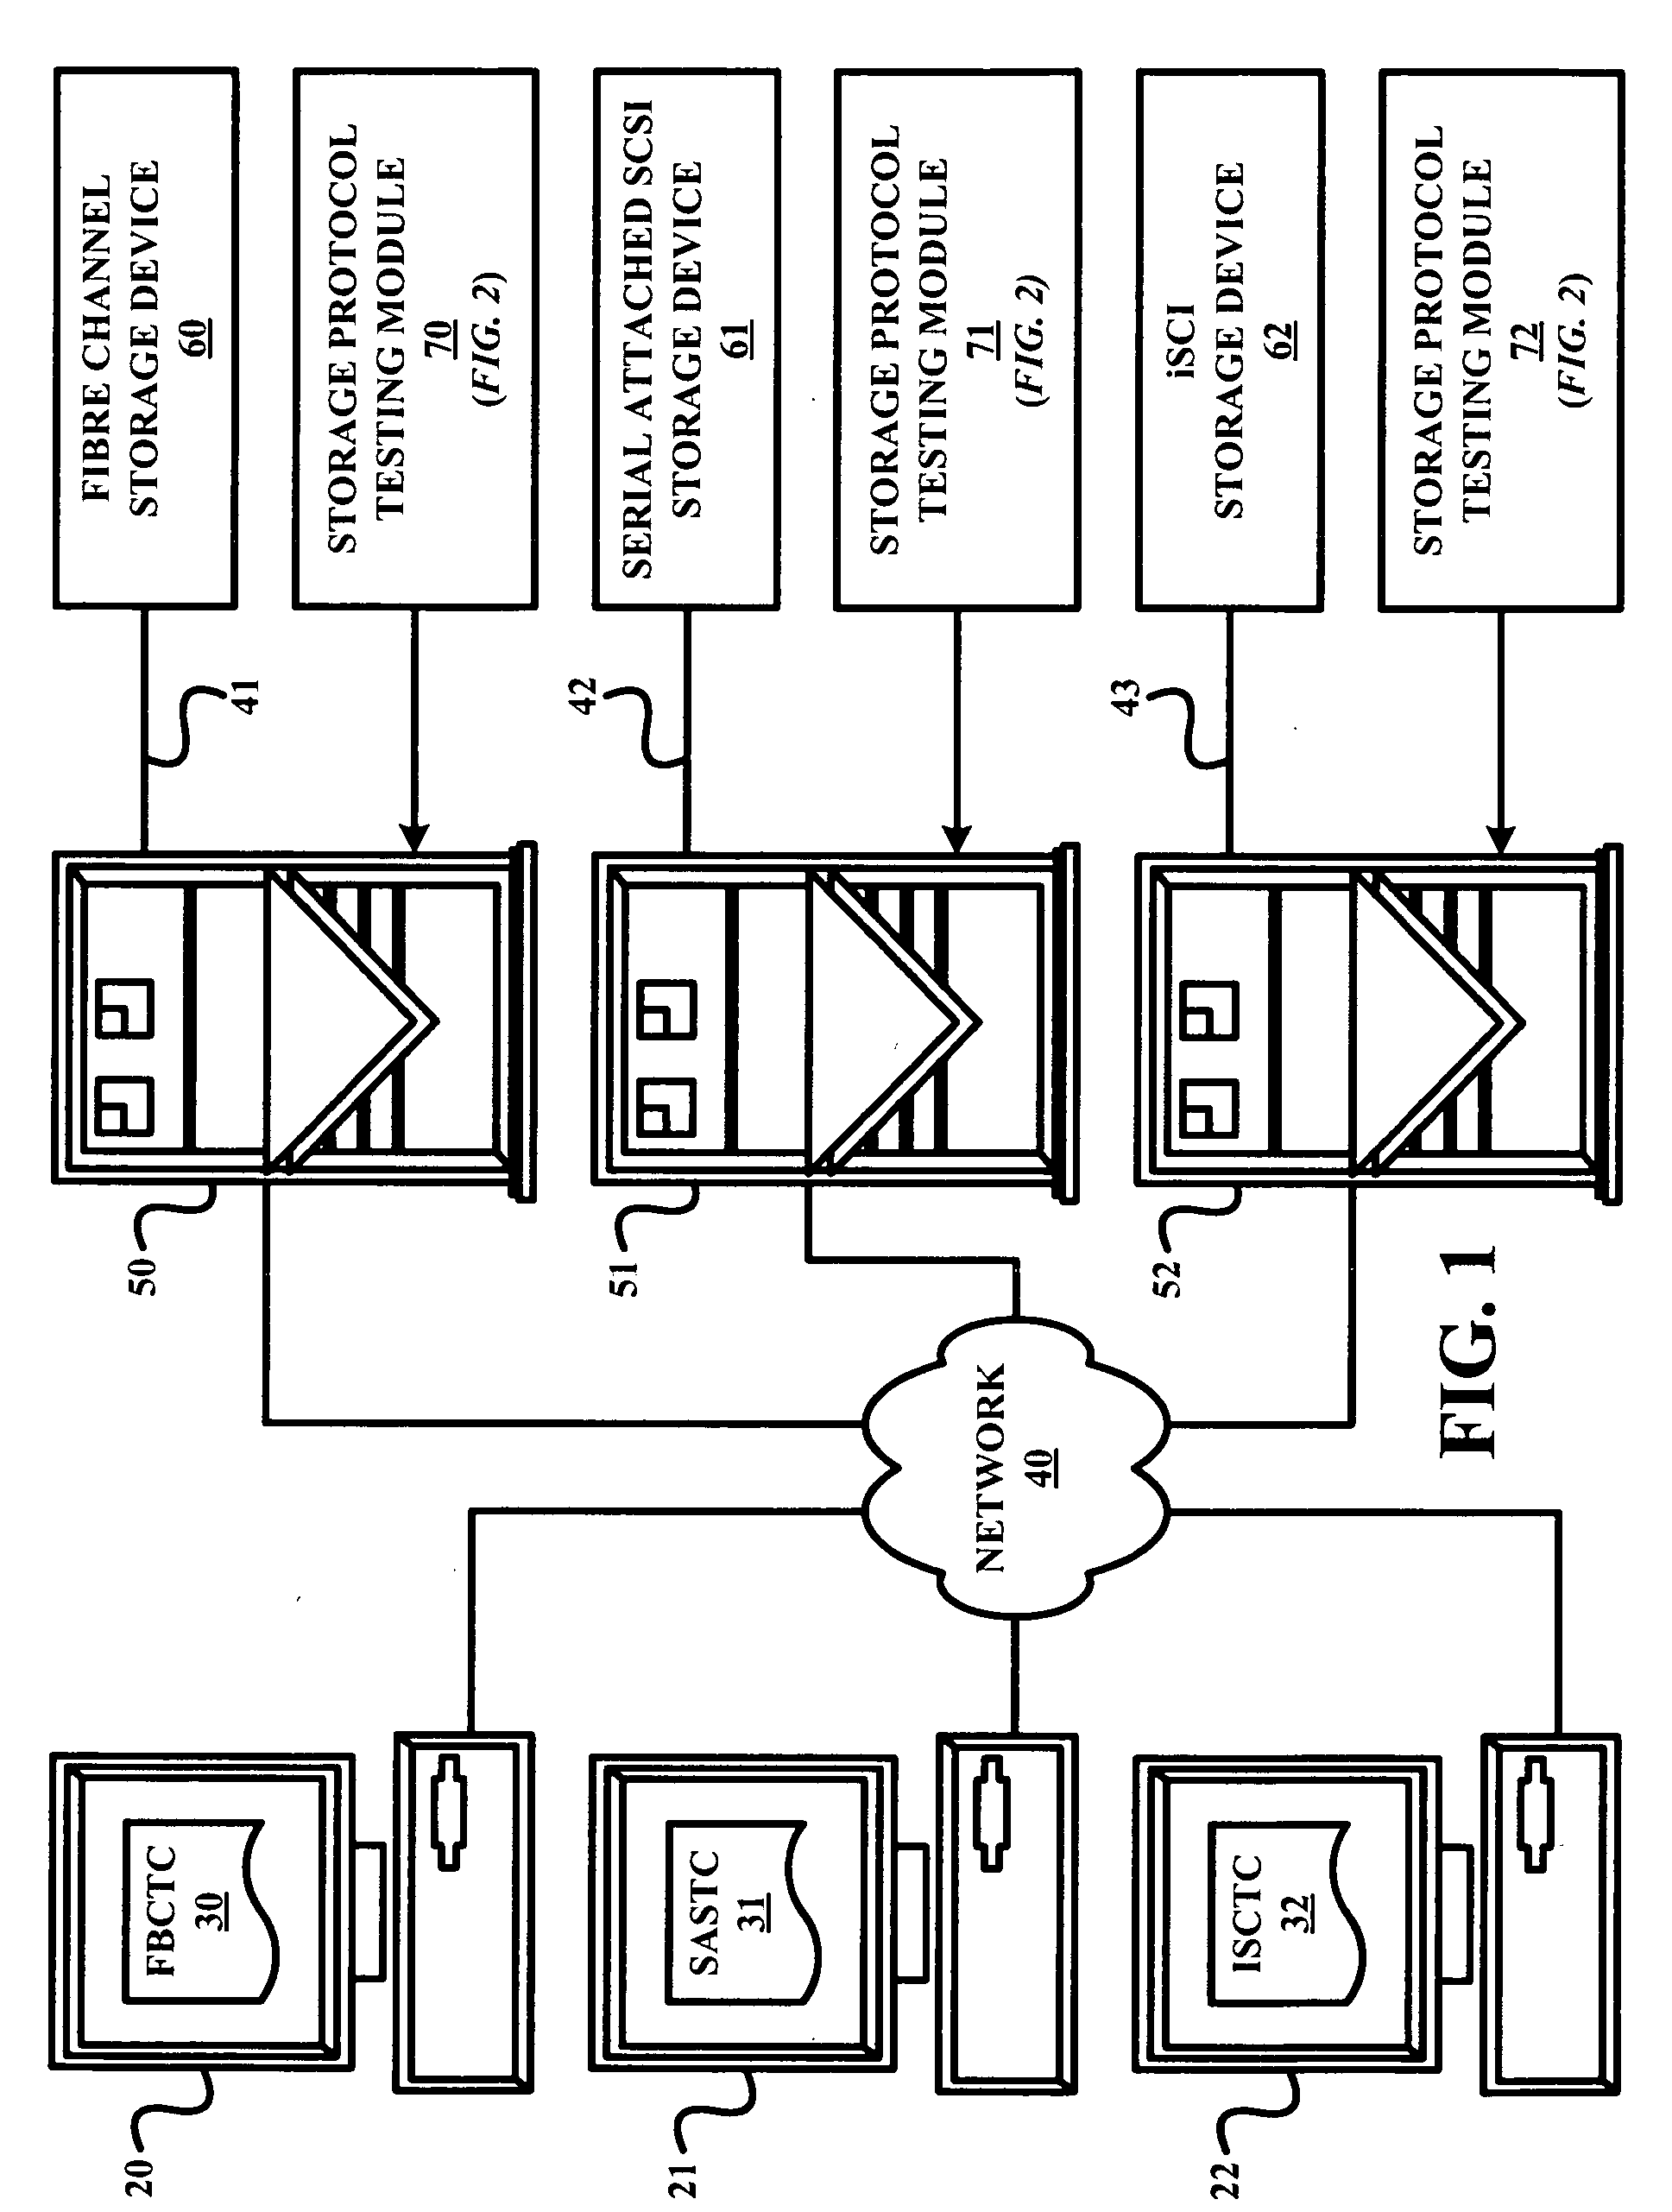 Multilayered architecture for storage protocol conformance testing of storage devices